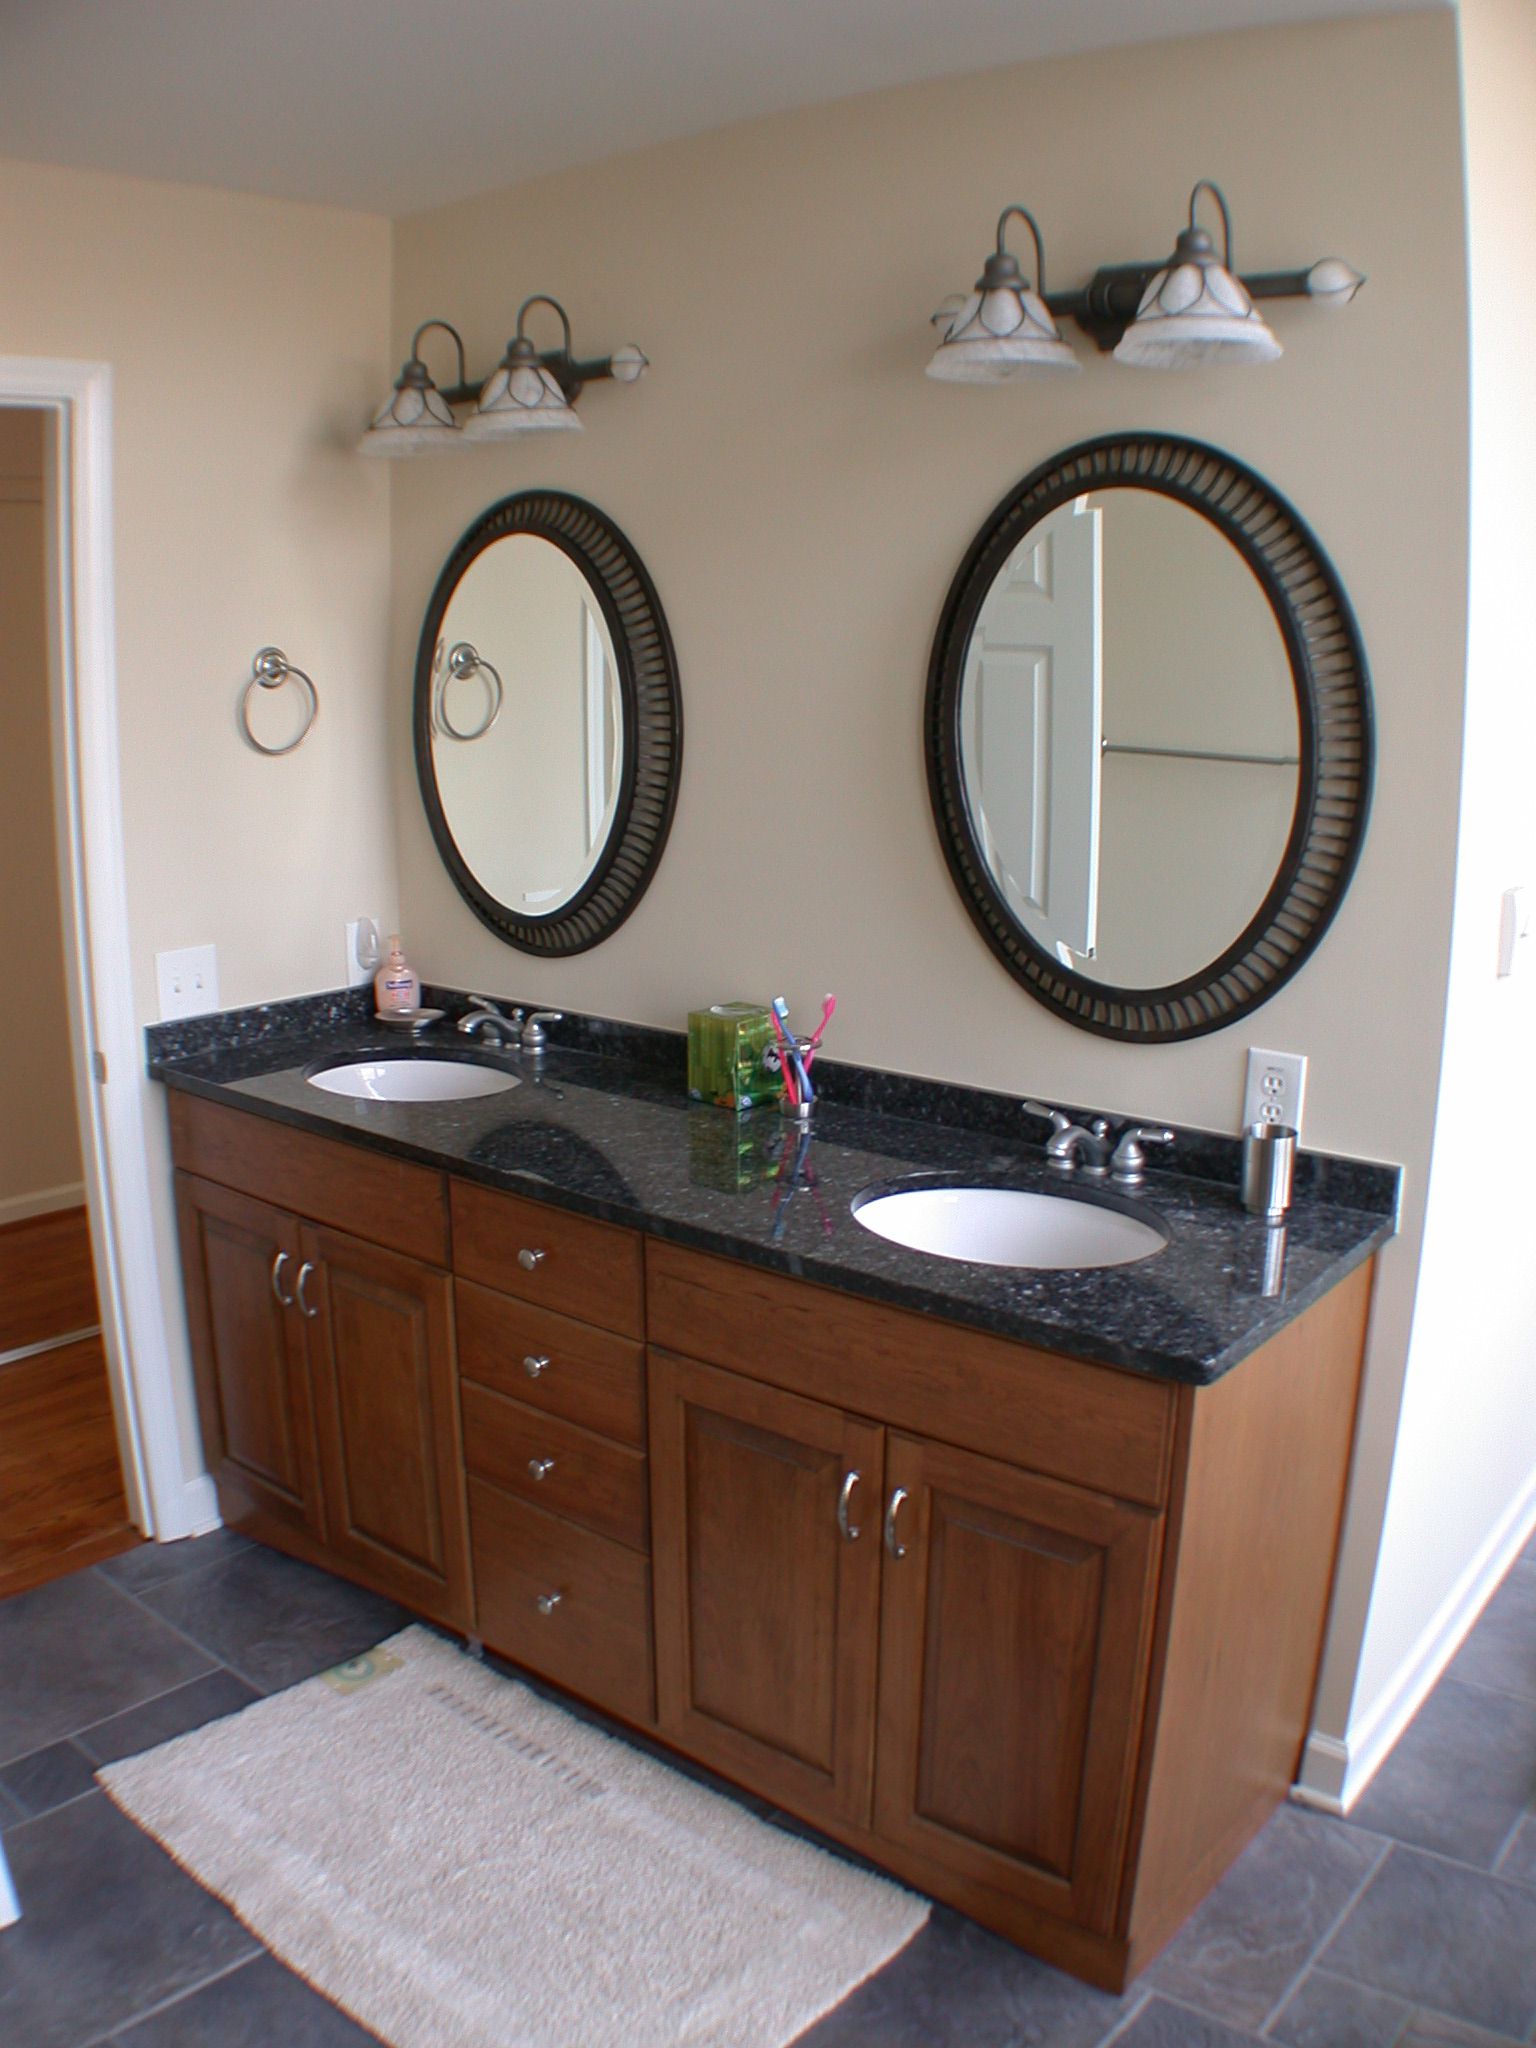 Bathroom Plan Sink Attractive Bathroom Plan Uses Double Sink Vanity With Marble Countertop Under Twin Circular Mirror And Branched Lamps Bathroom Double Sink Vanity Application For Spacious Bathroom Design